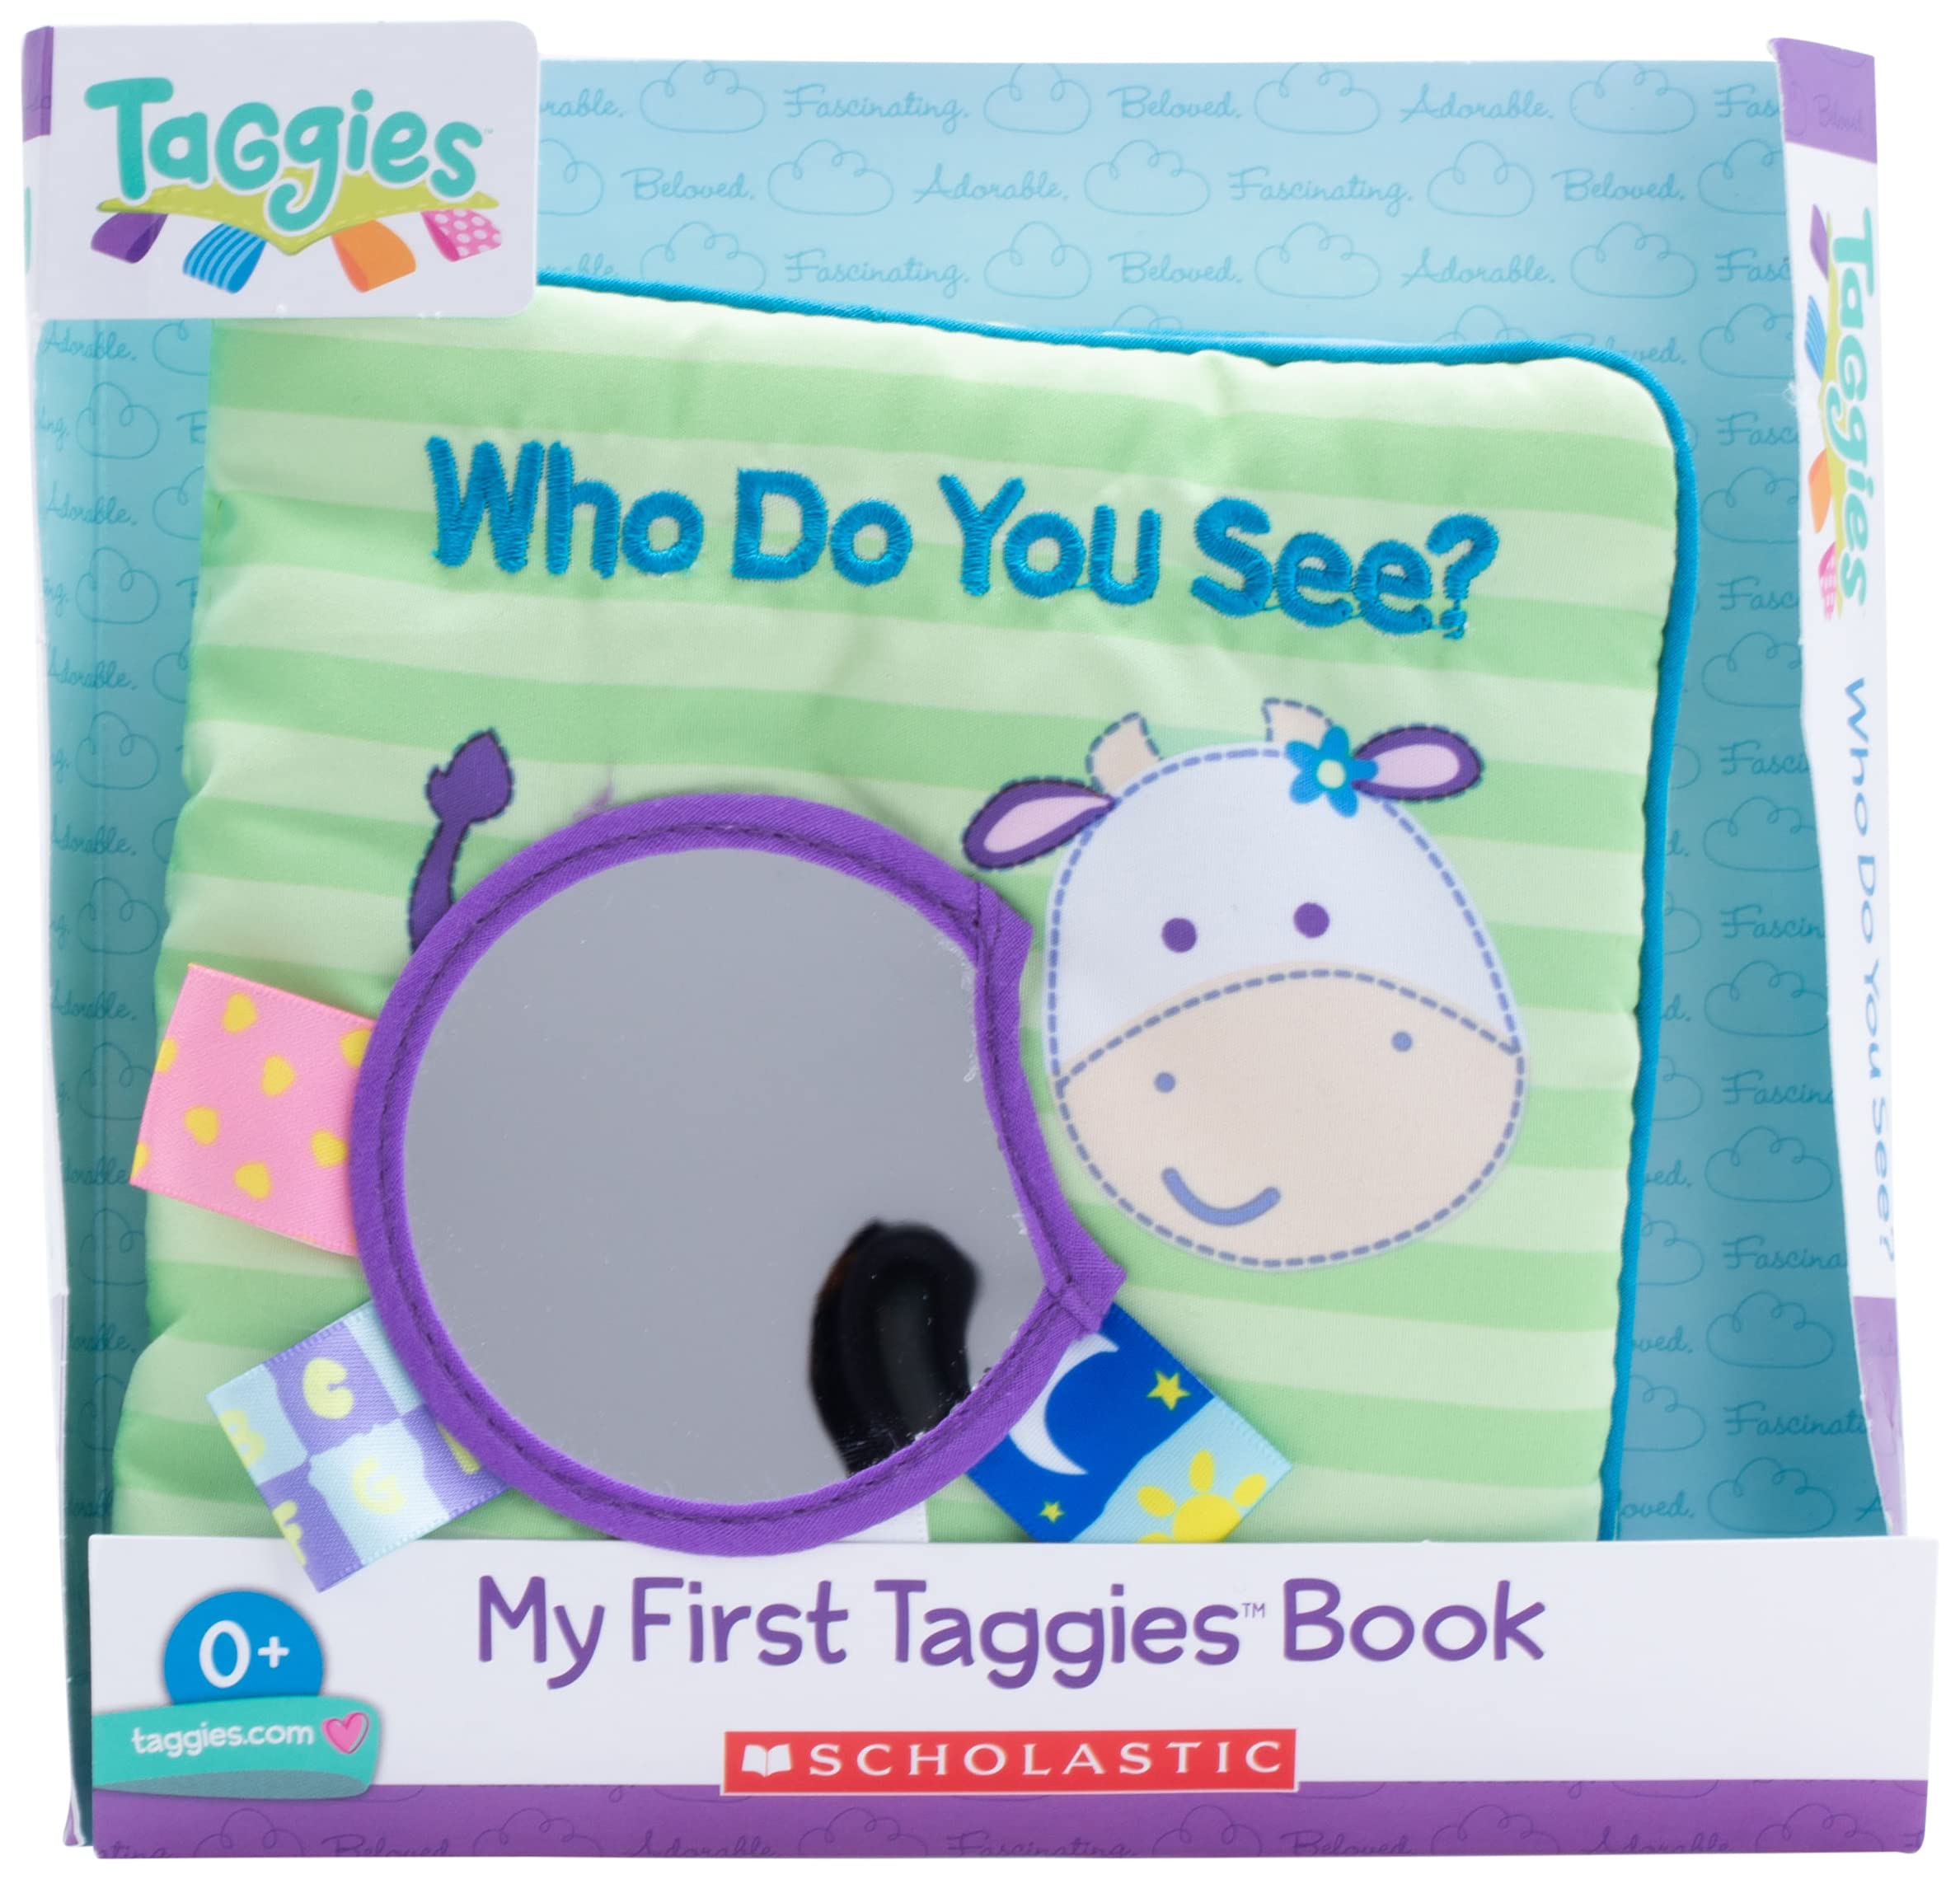 My First Taggies Book: Who Do You See?